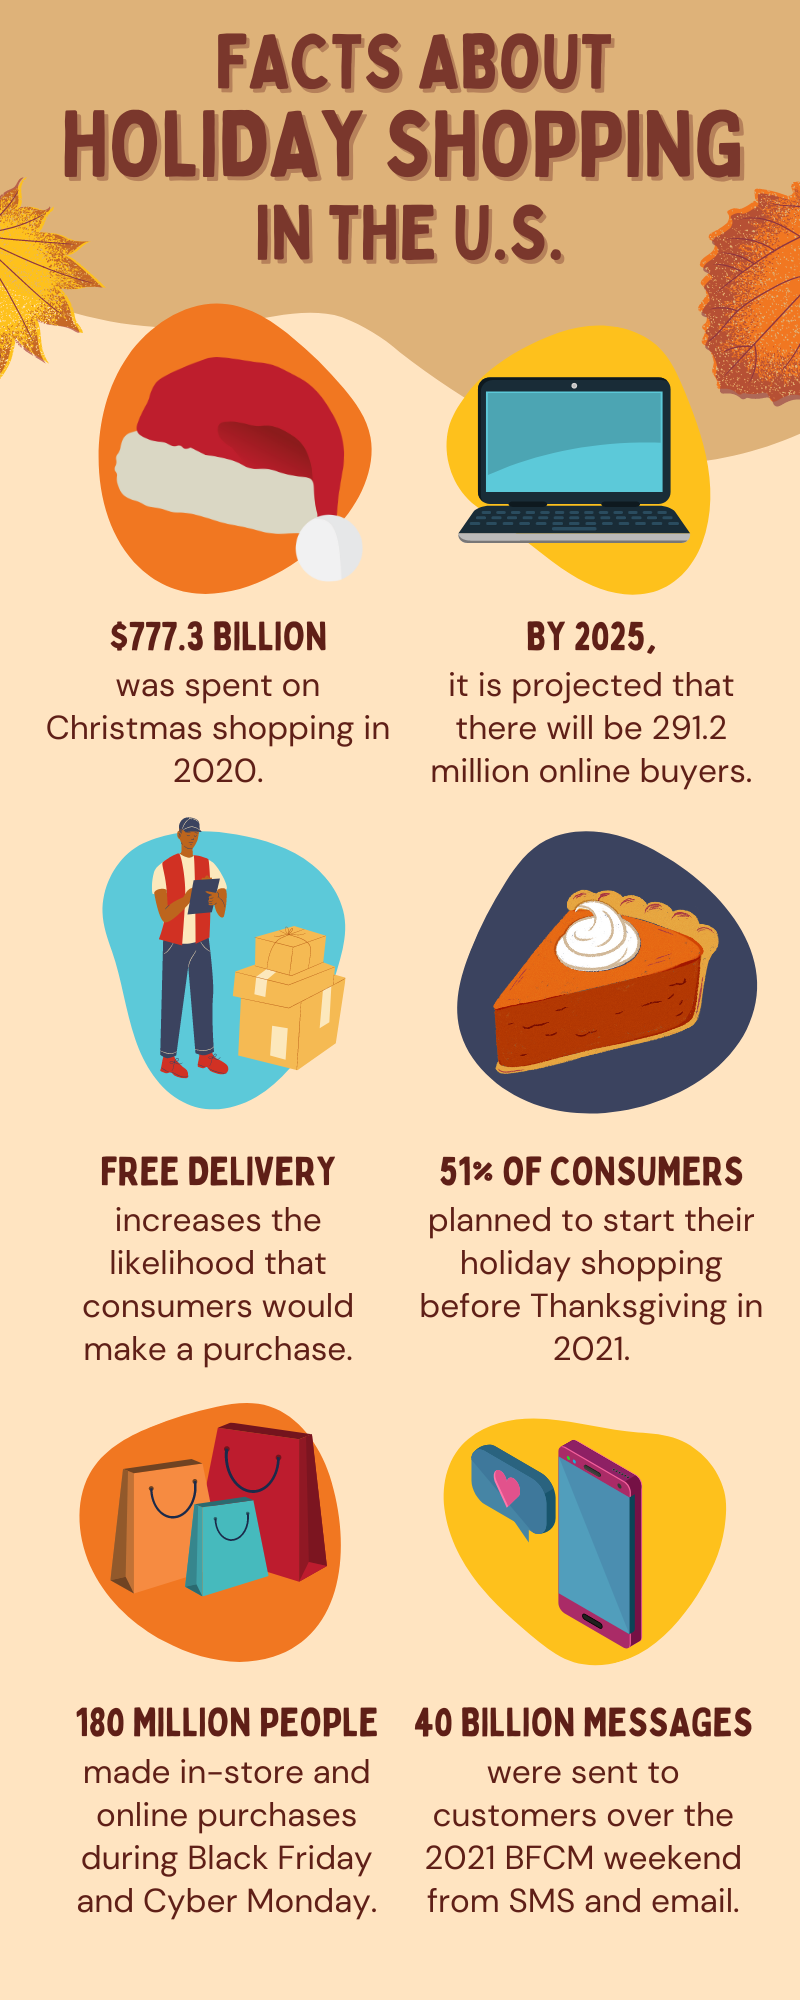 Facts About Holiday Shopping in the U.S.